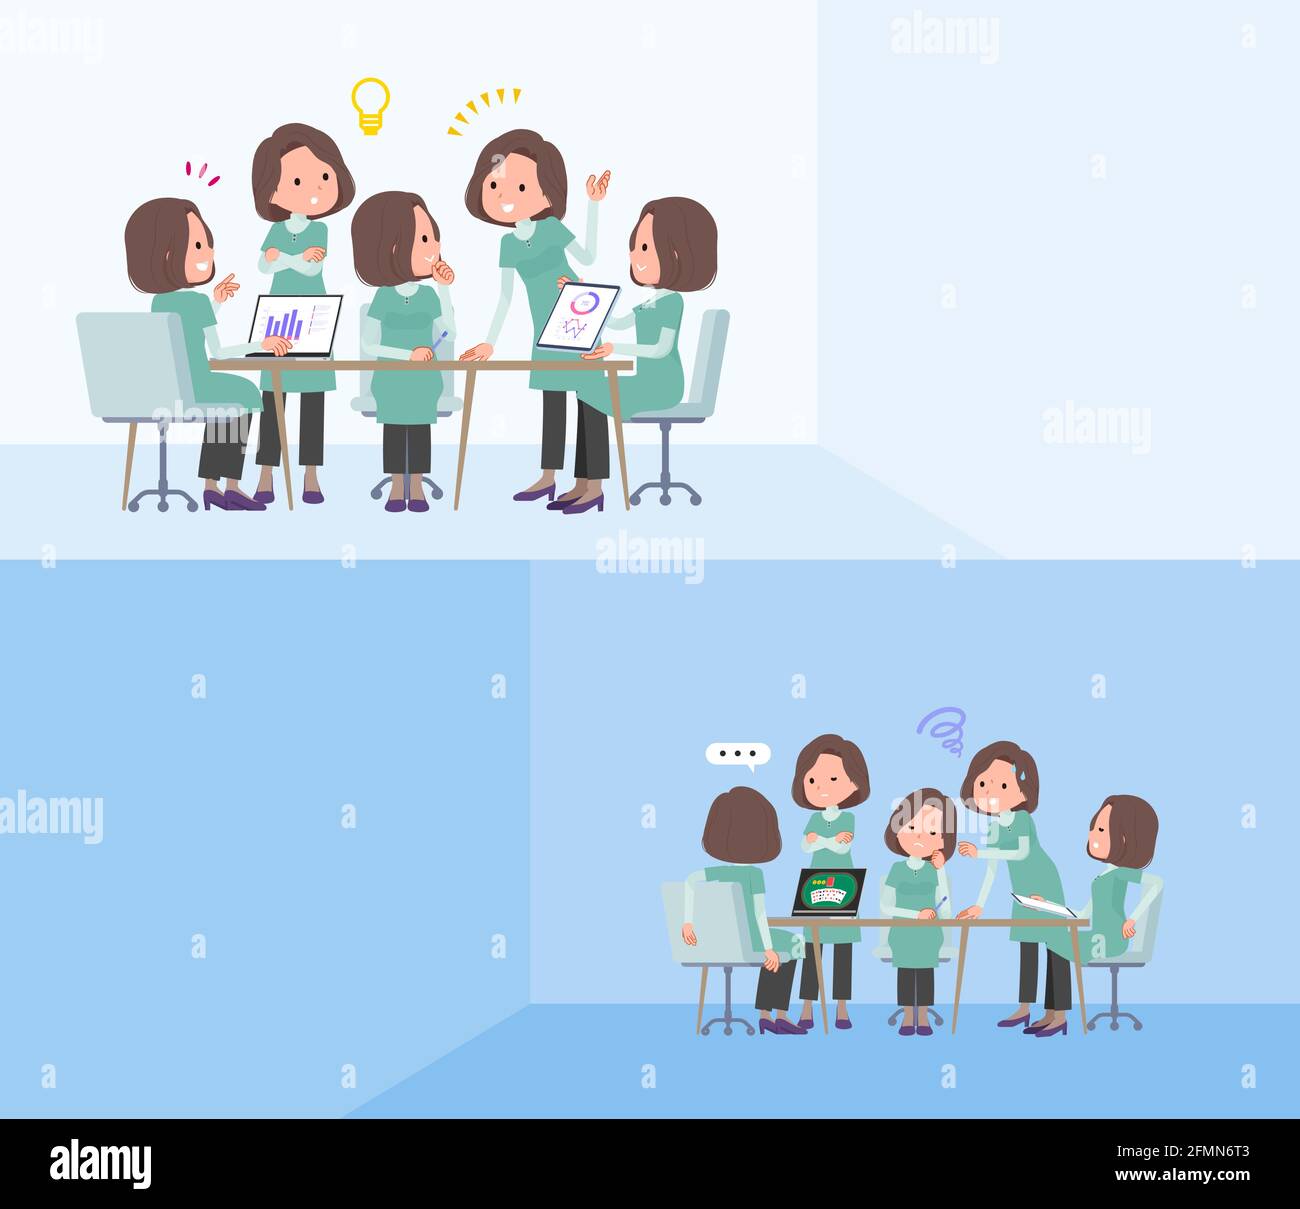 A set of middle-aged women in tunic having an intracerebral meeting.It's vector art so easy to edit. Stock Vector